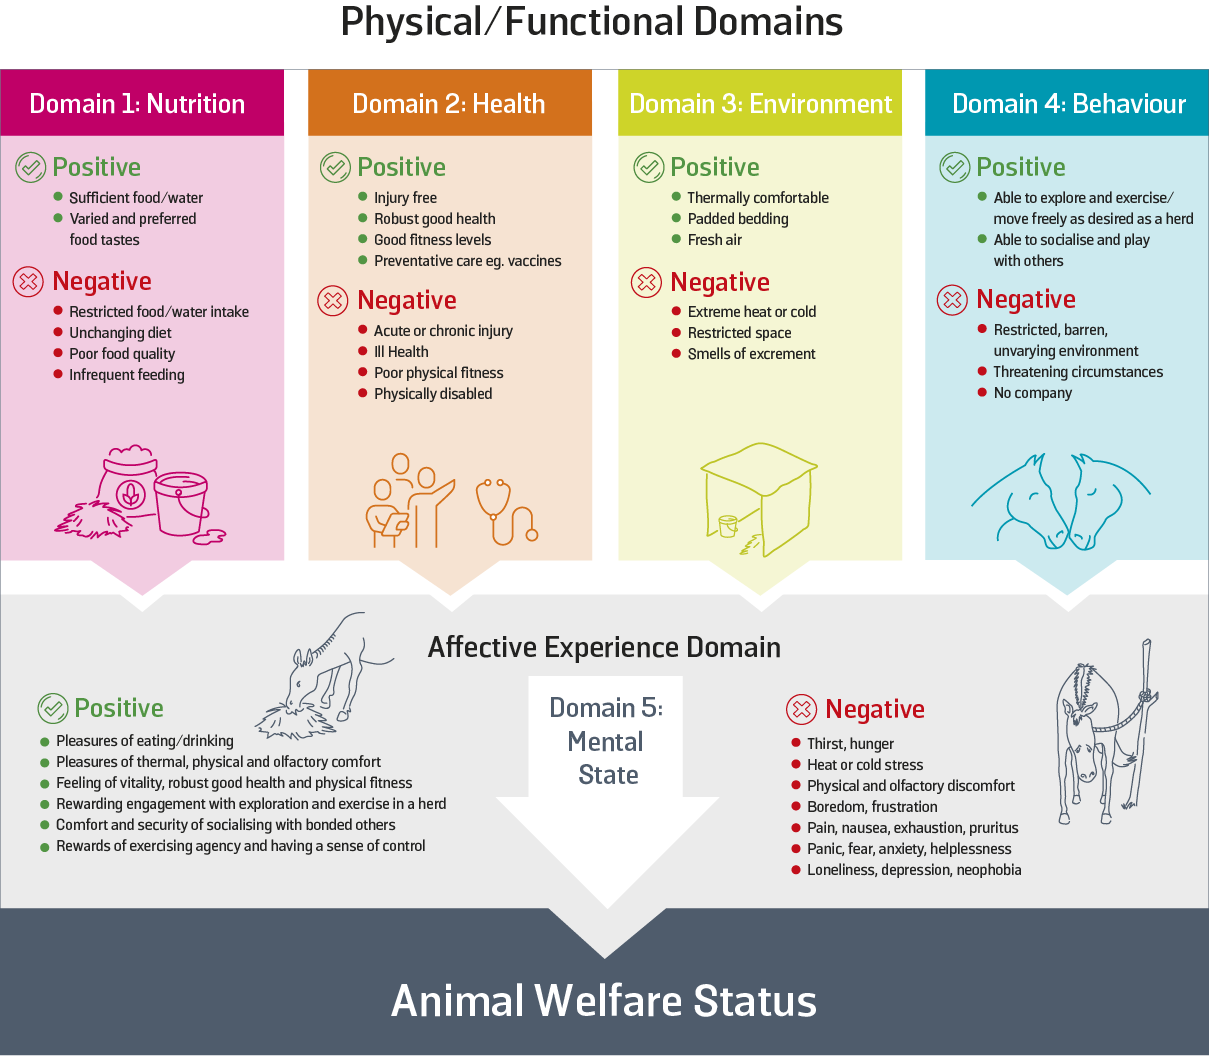 Figure 13: Examples of positive and negative experiences within the Five Domains framework [7]